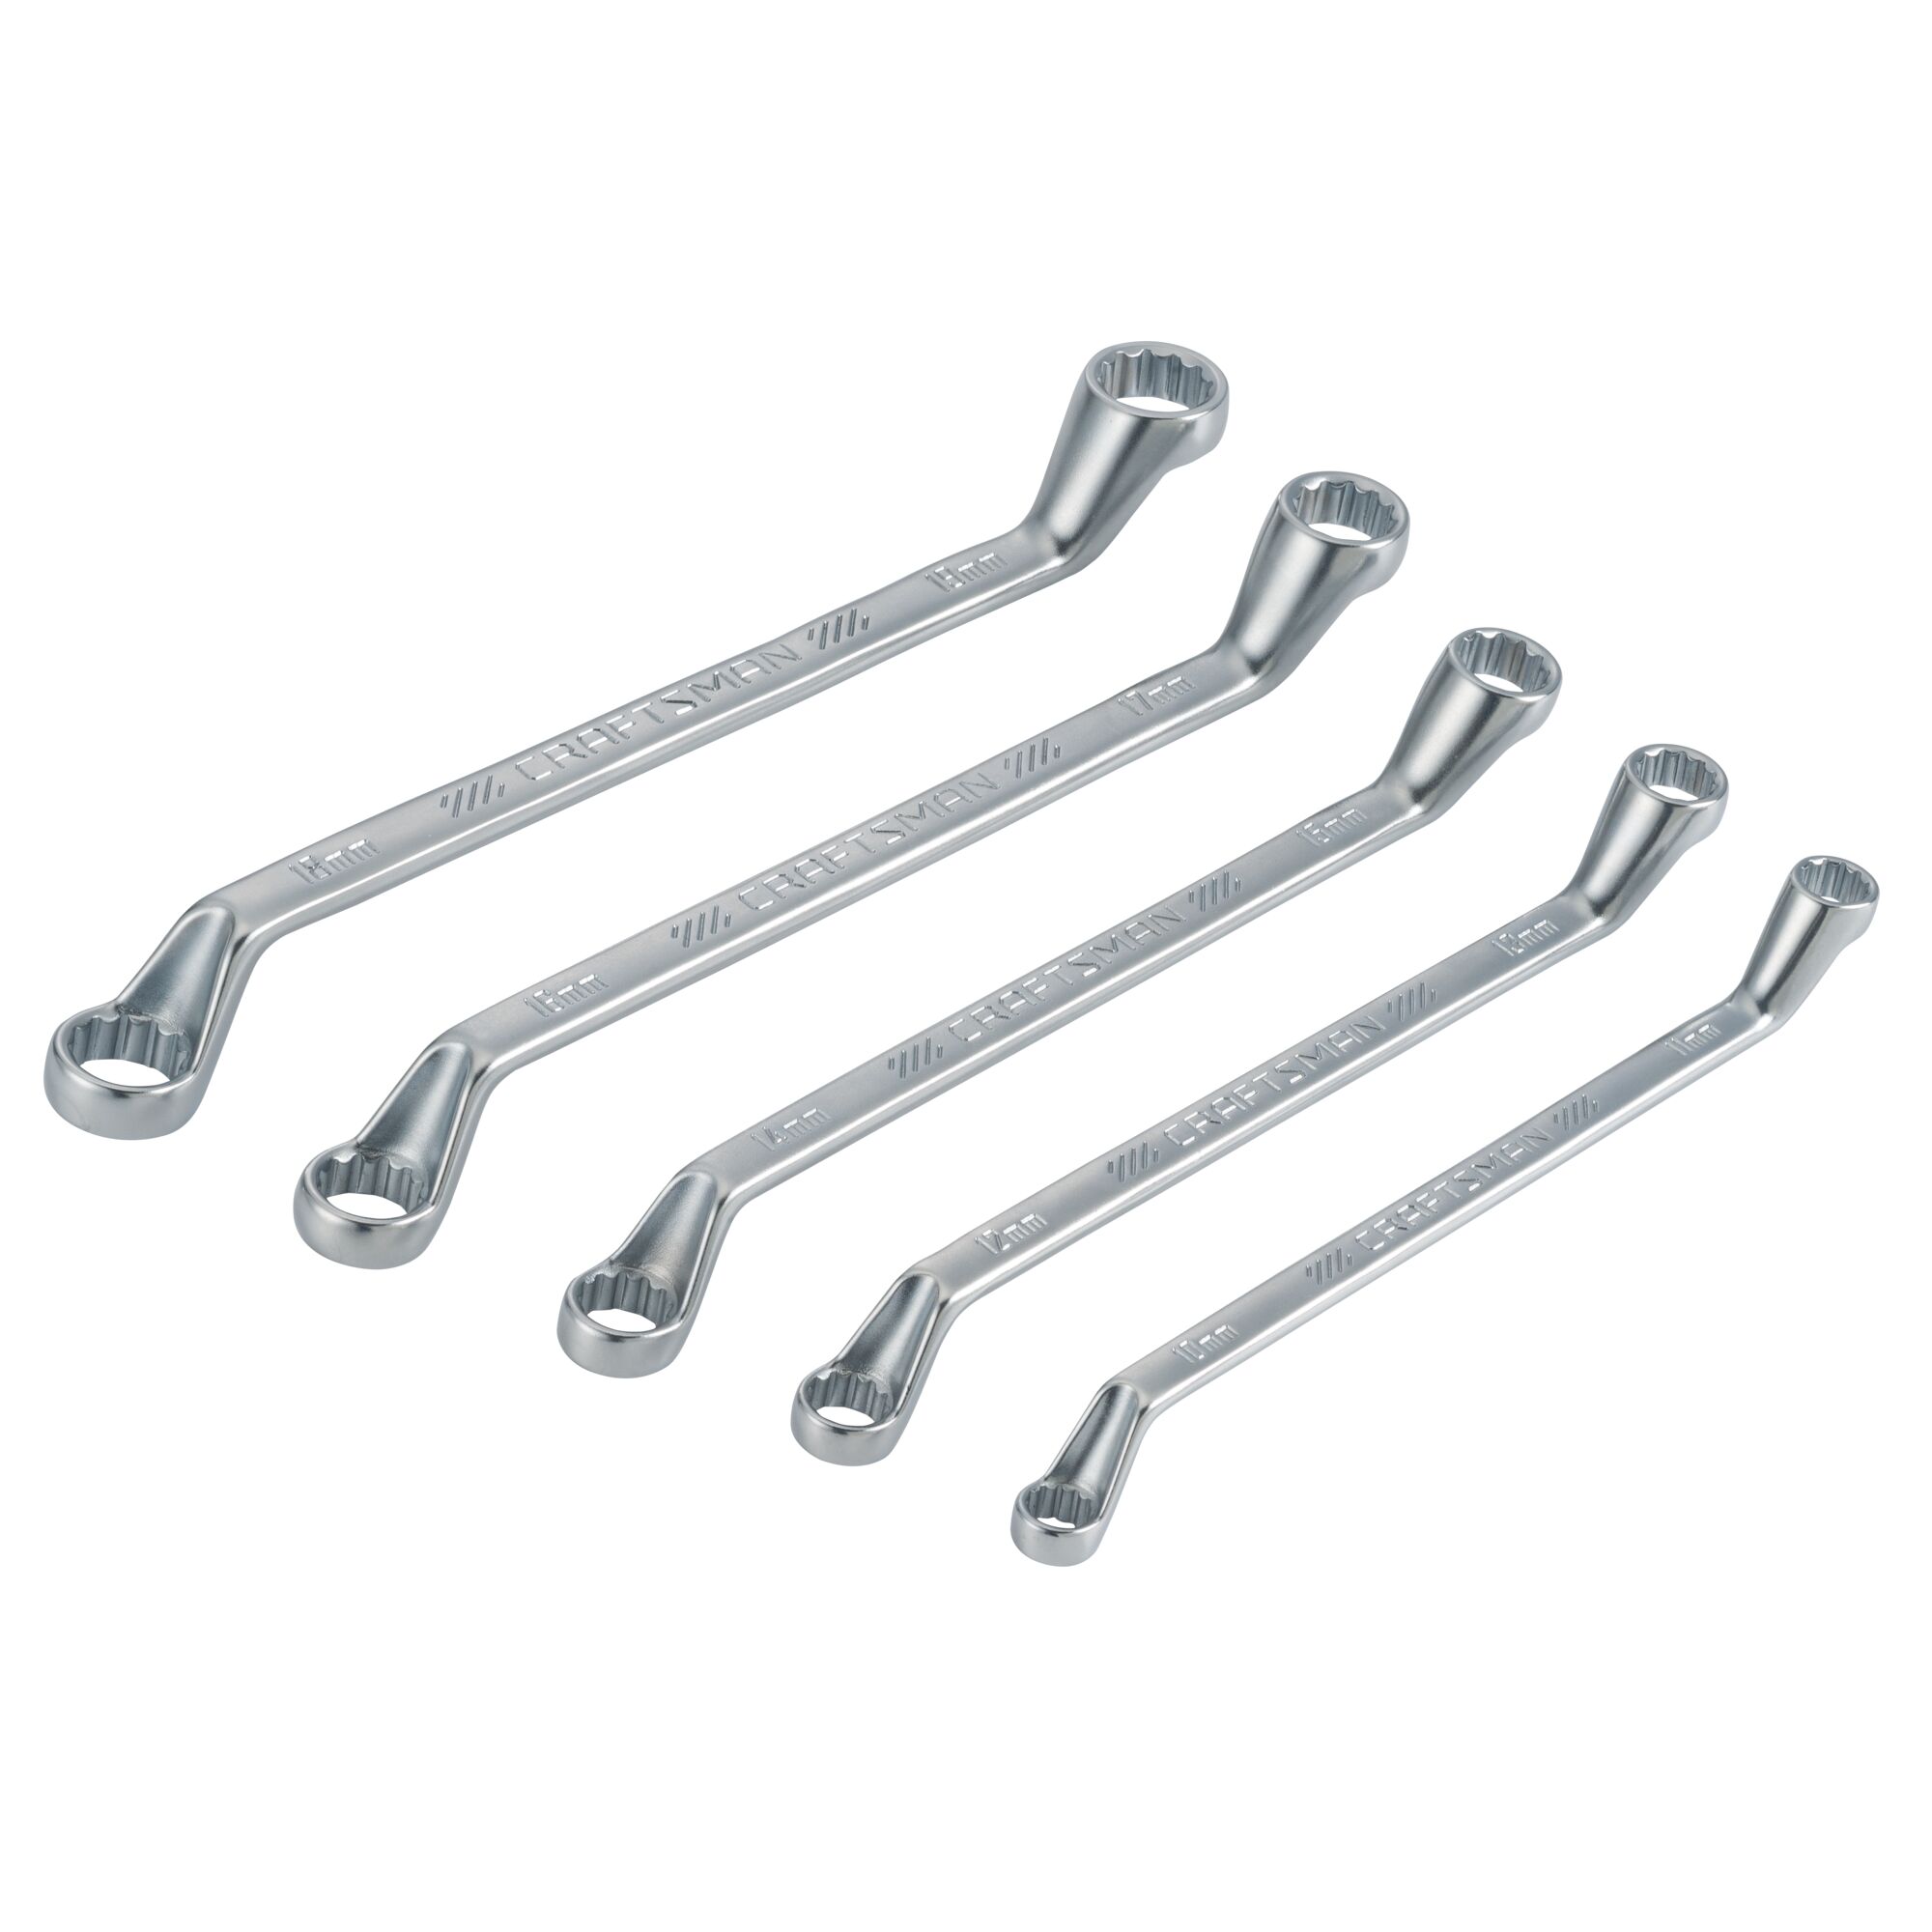 View of CRAFTSMAN Wrenches: Box on white background